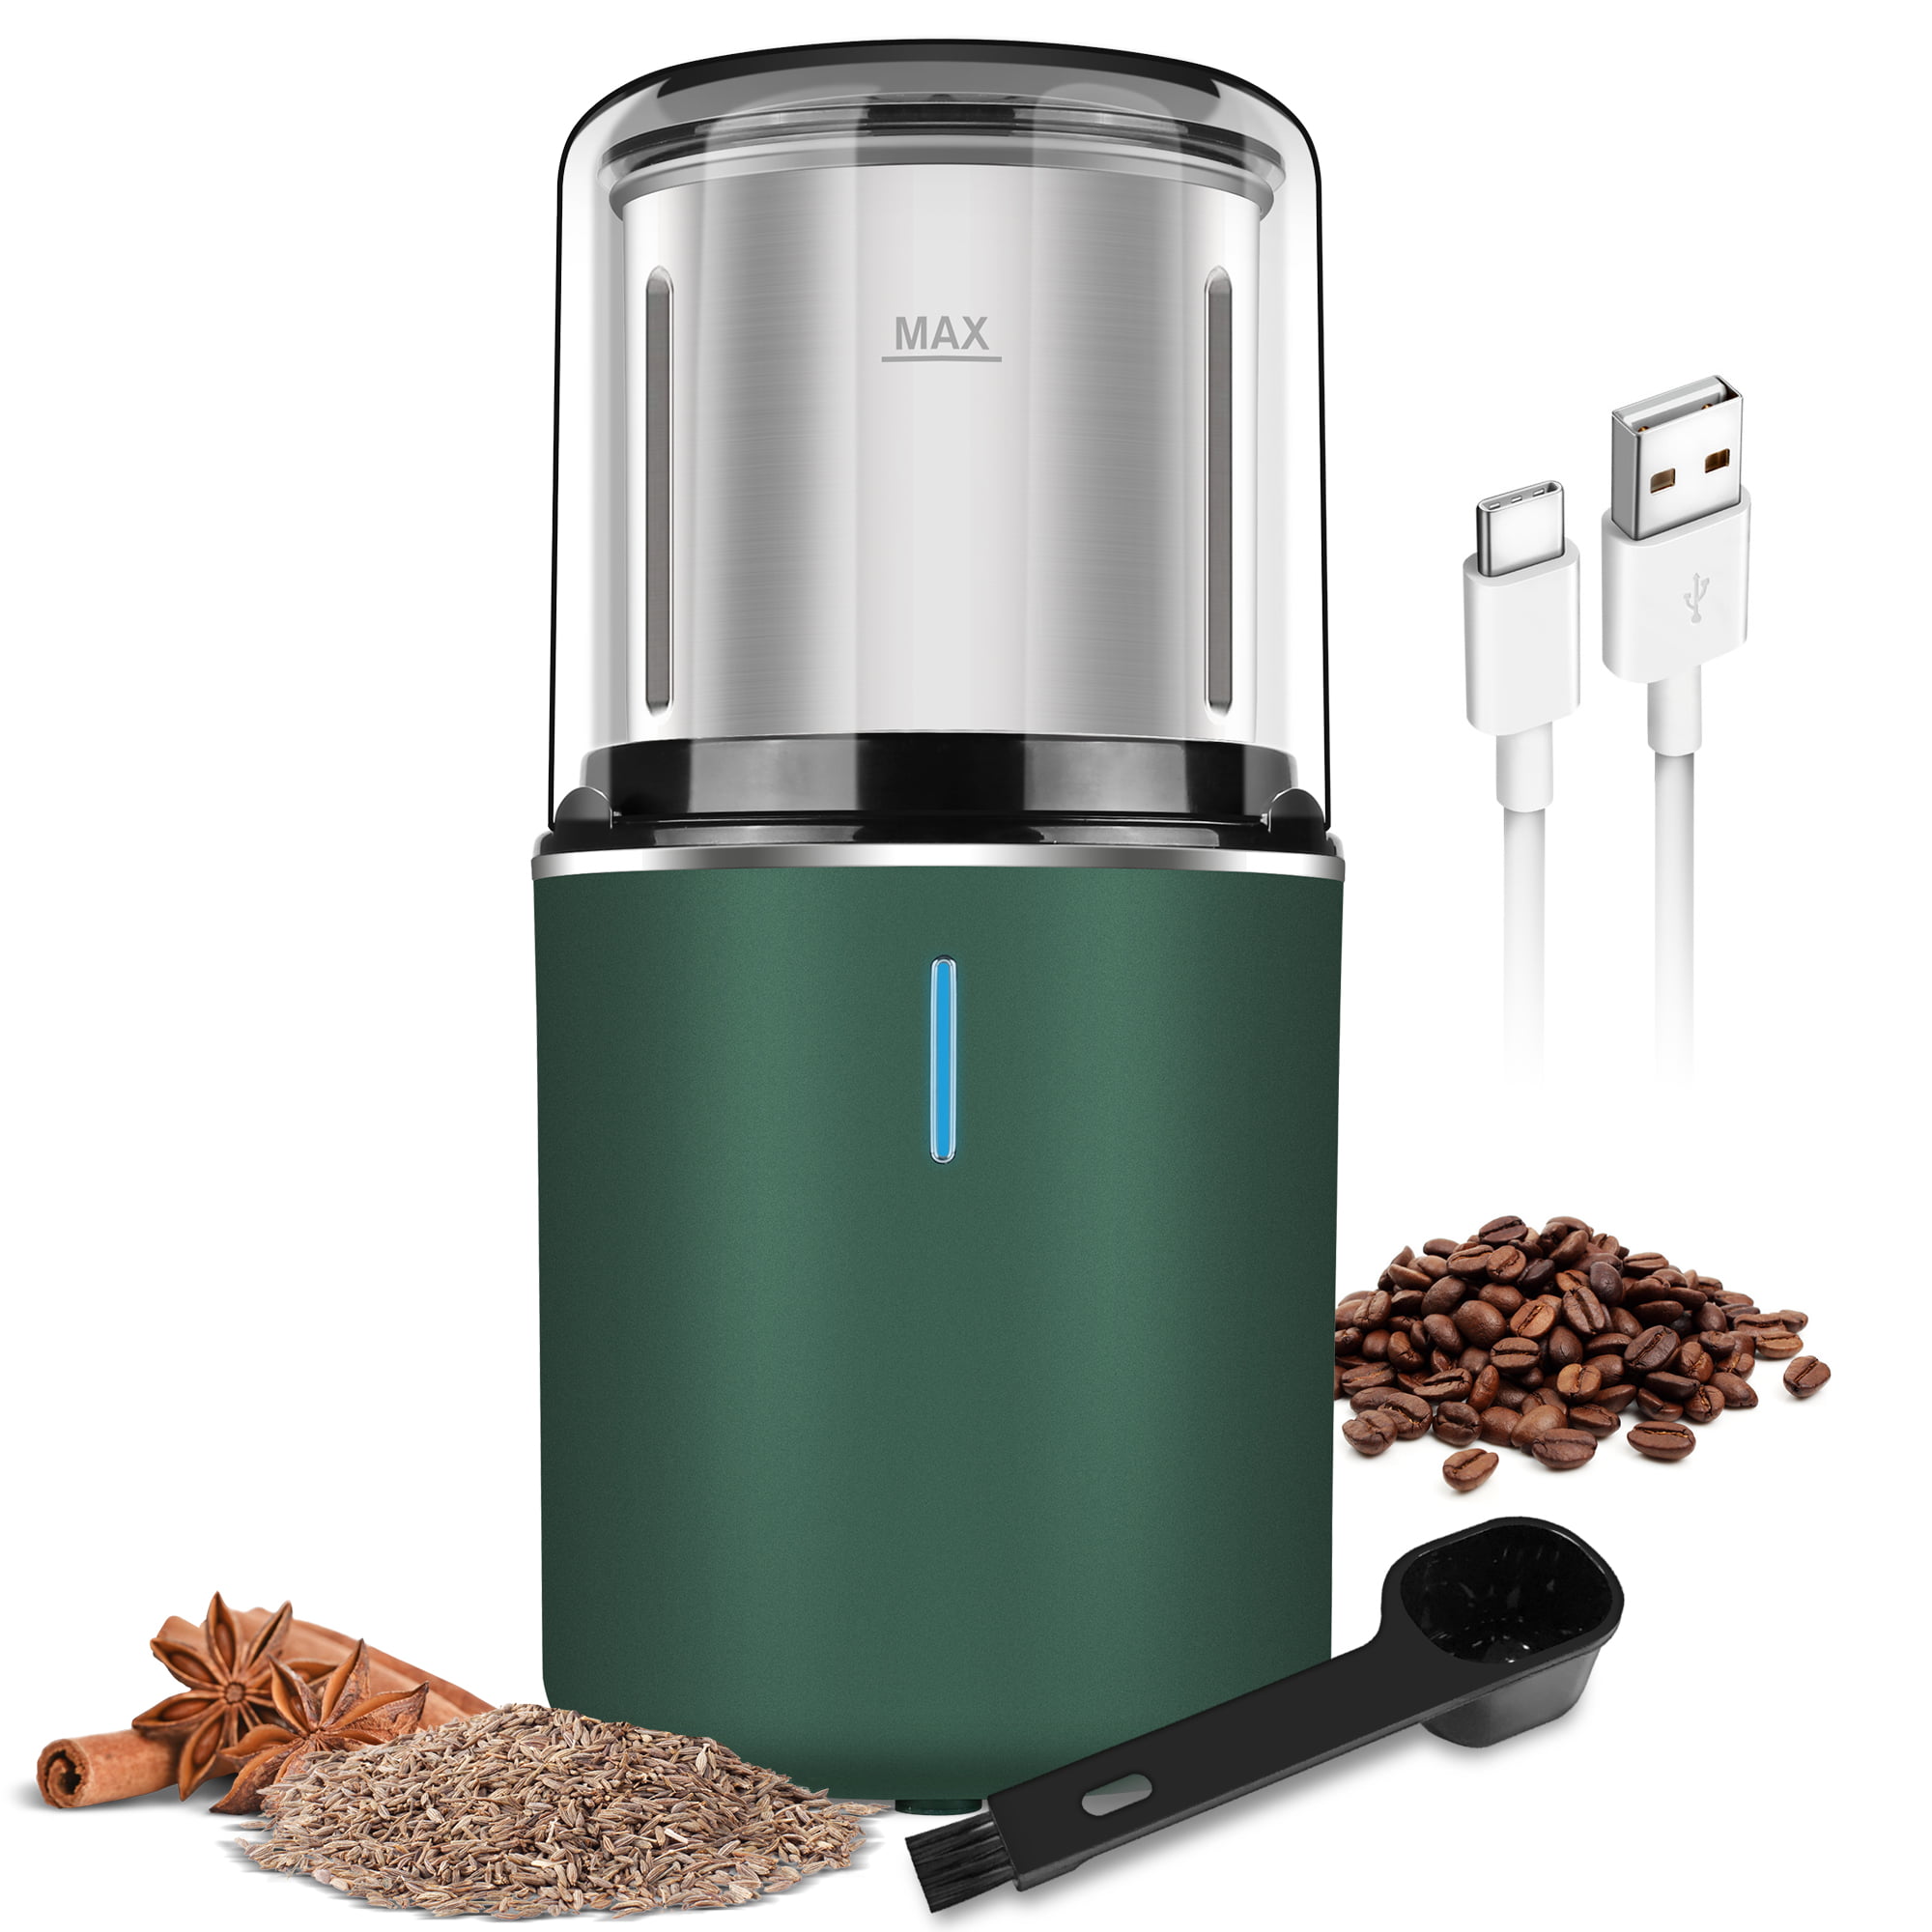 Herbs Black QIN Precision Electric Spice/Coffee Adjustable Setting Grinder Mill With Large Grinding Capacity Also for Spices Grains Nuts